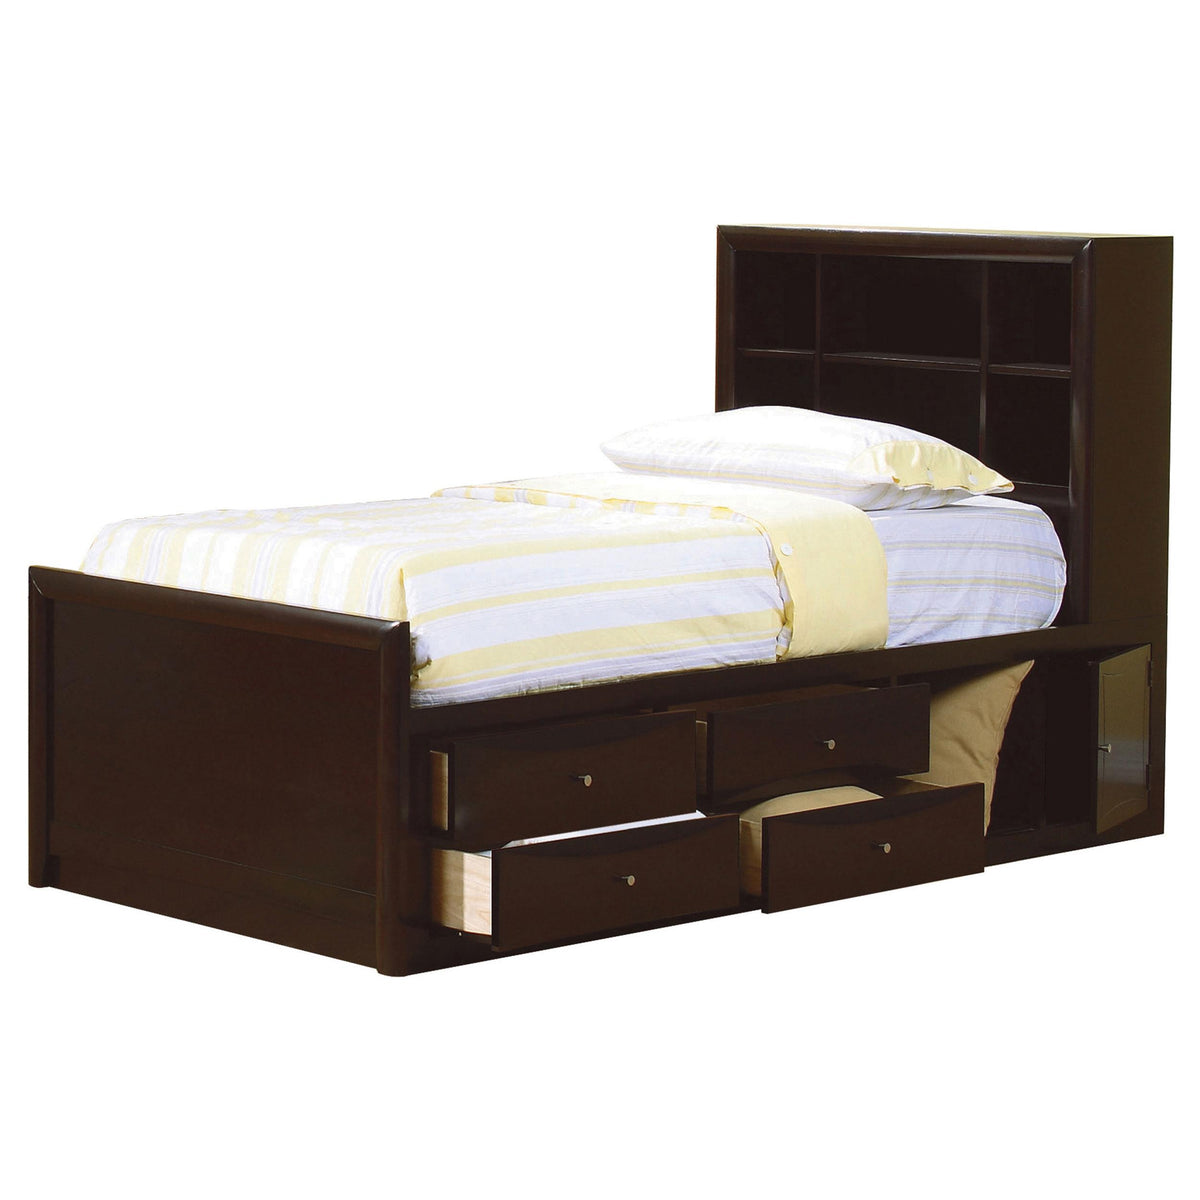 Phoenix Full Bookcase Bed with Underbed Storage Cappuccino  Las Vegas Furniture Stores